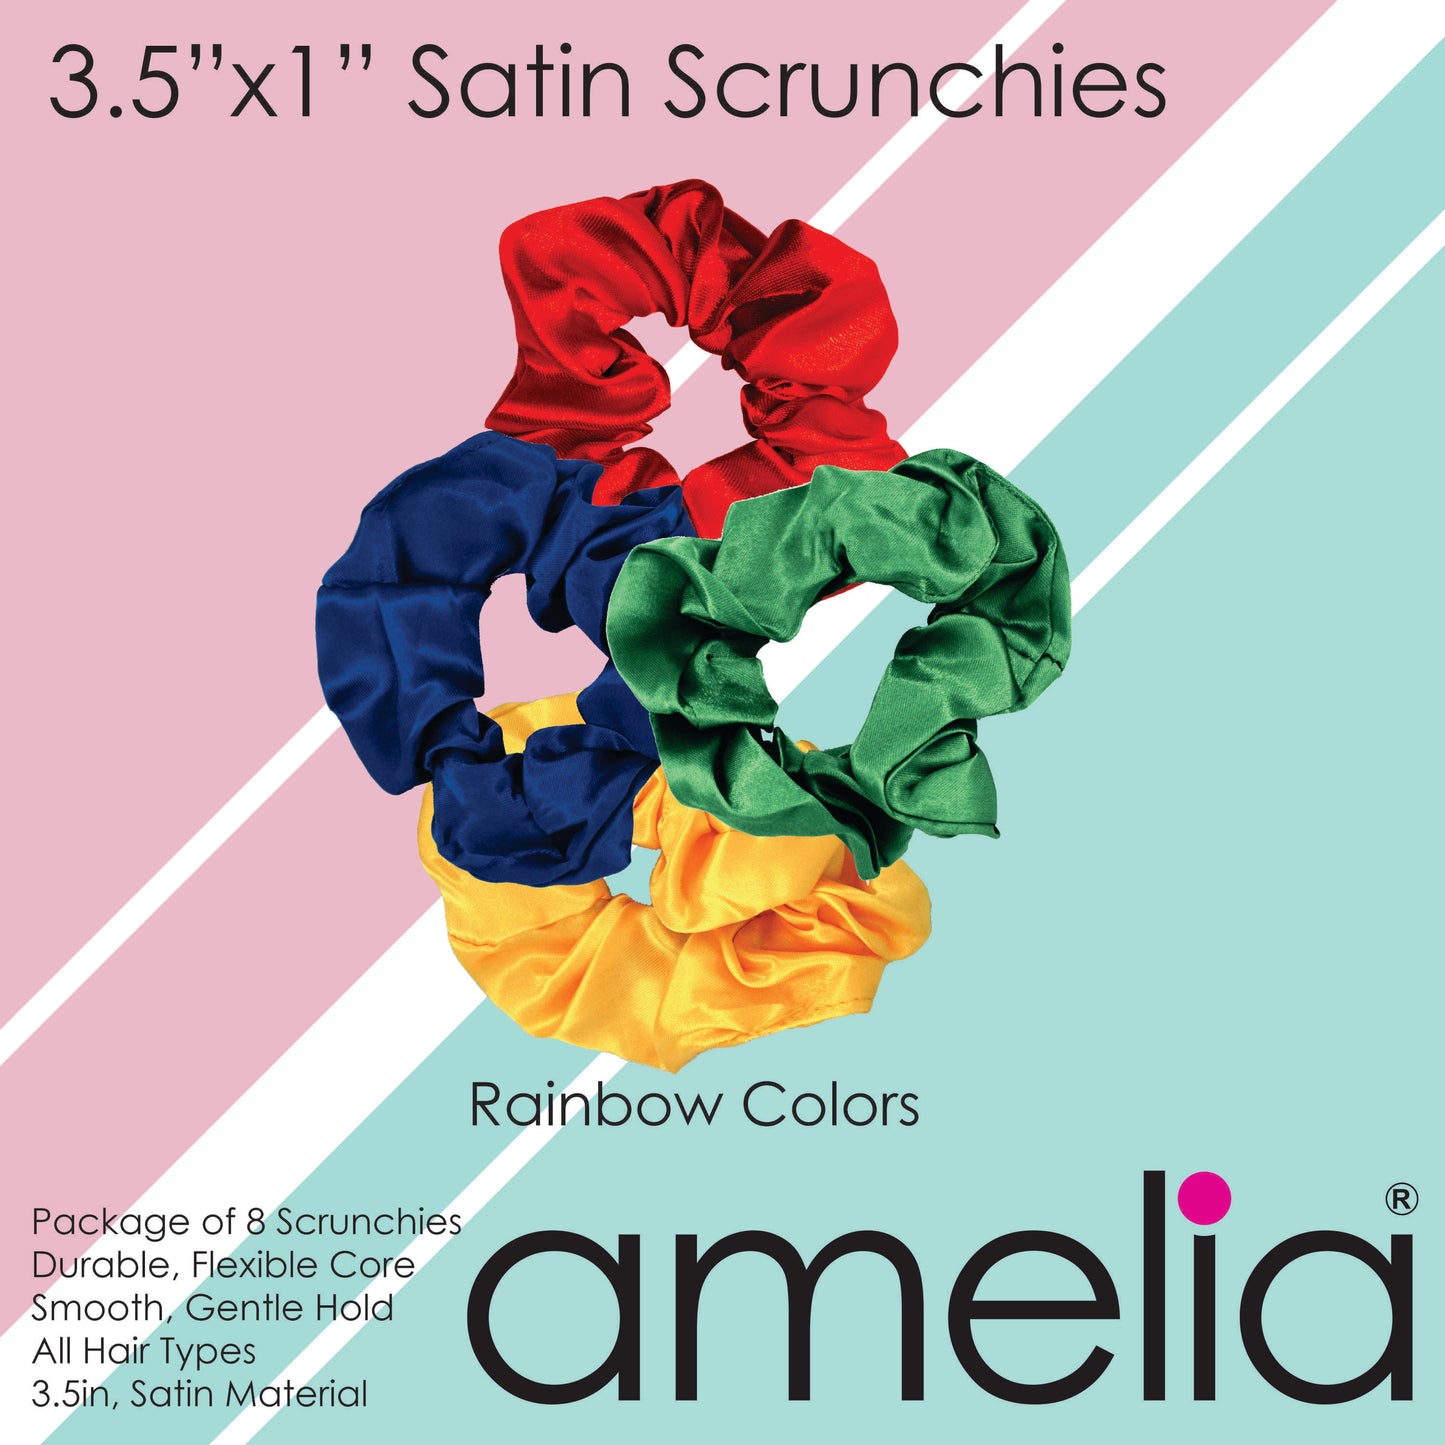 Amelia Beauty Products, Rainbow Colors Satin Scrunchies, 3.5in Diameter, Gentle on Hair, Strong Hold, No Snag, No Dents or Creases. 8 Pack